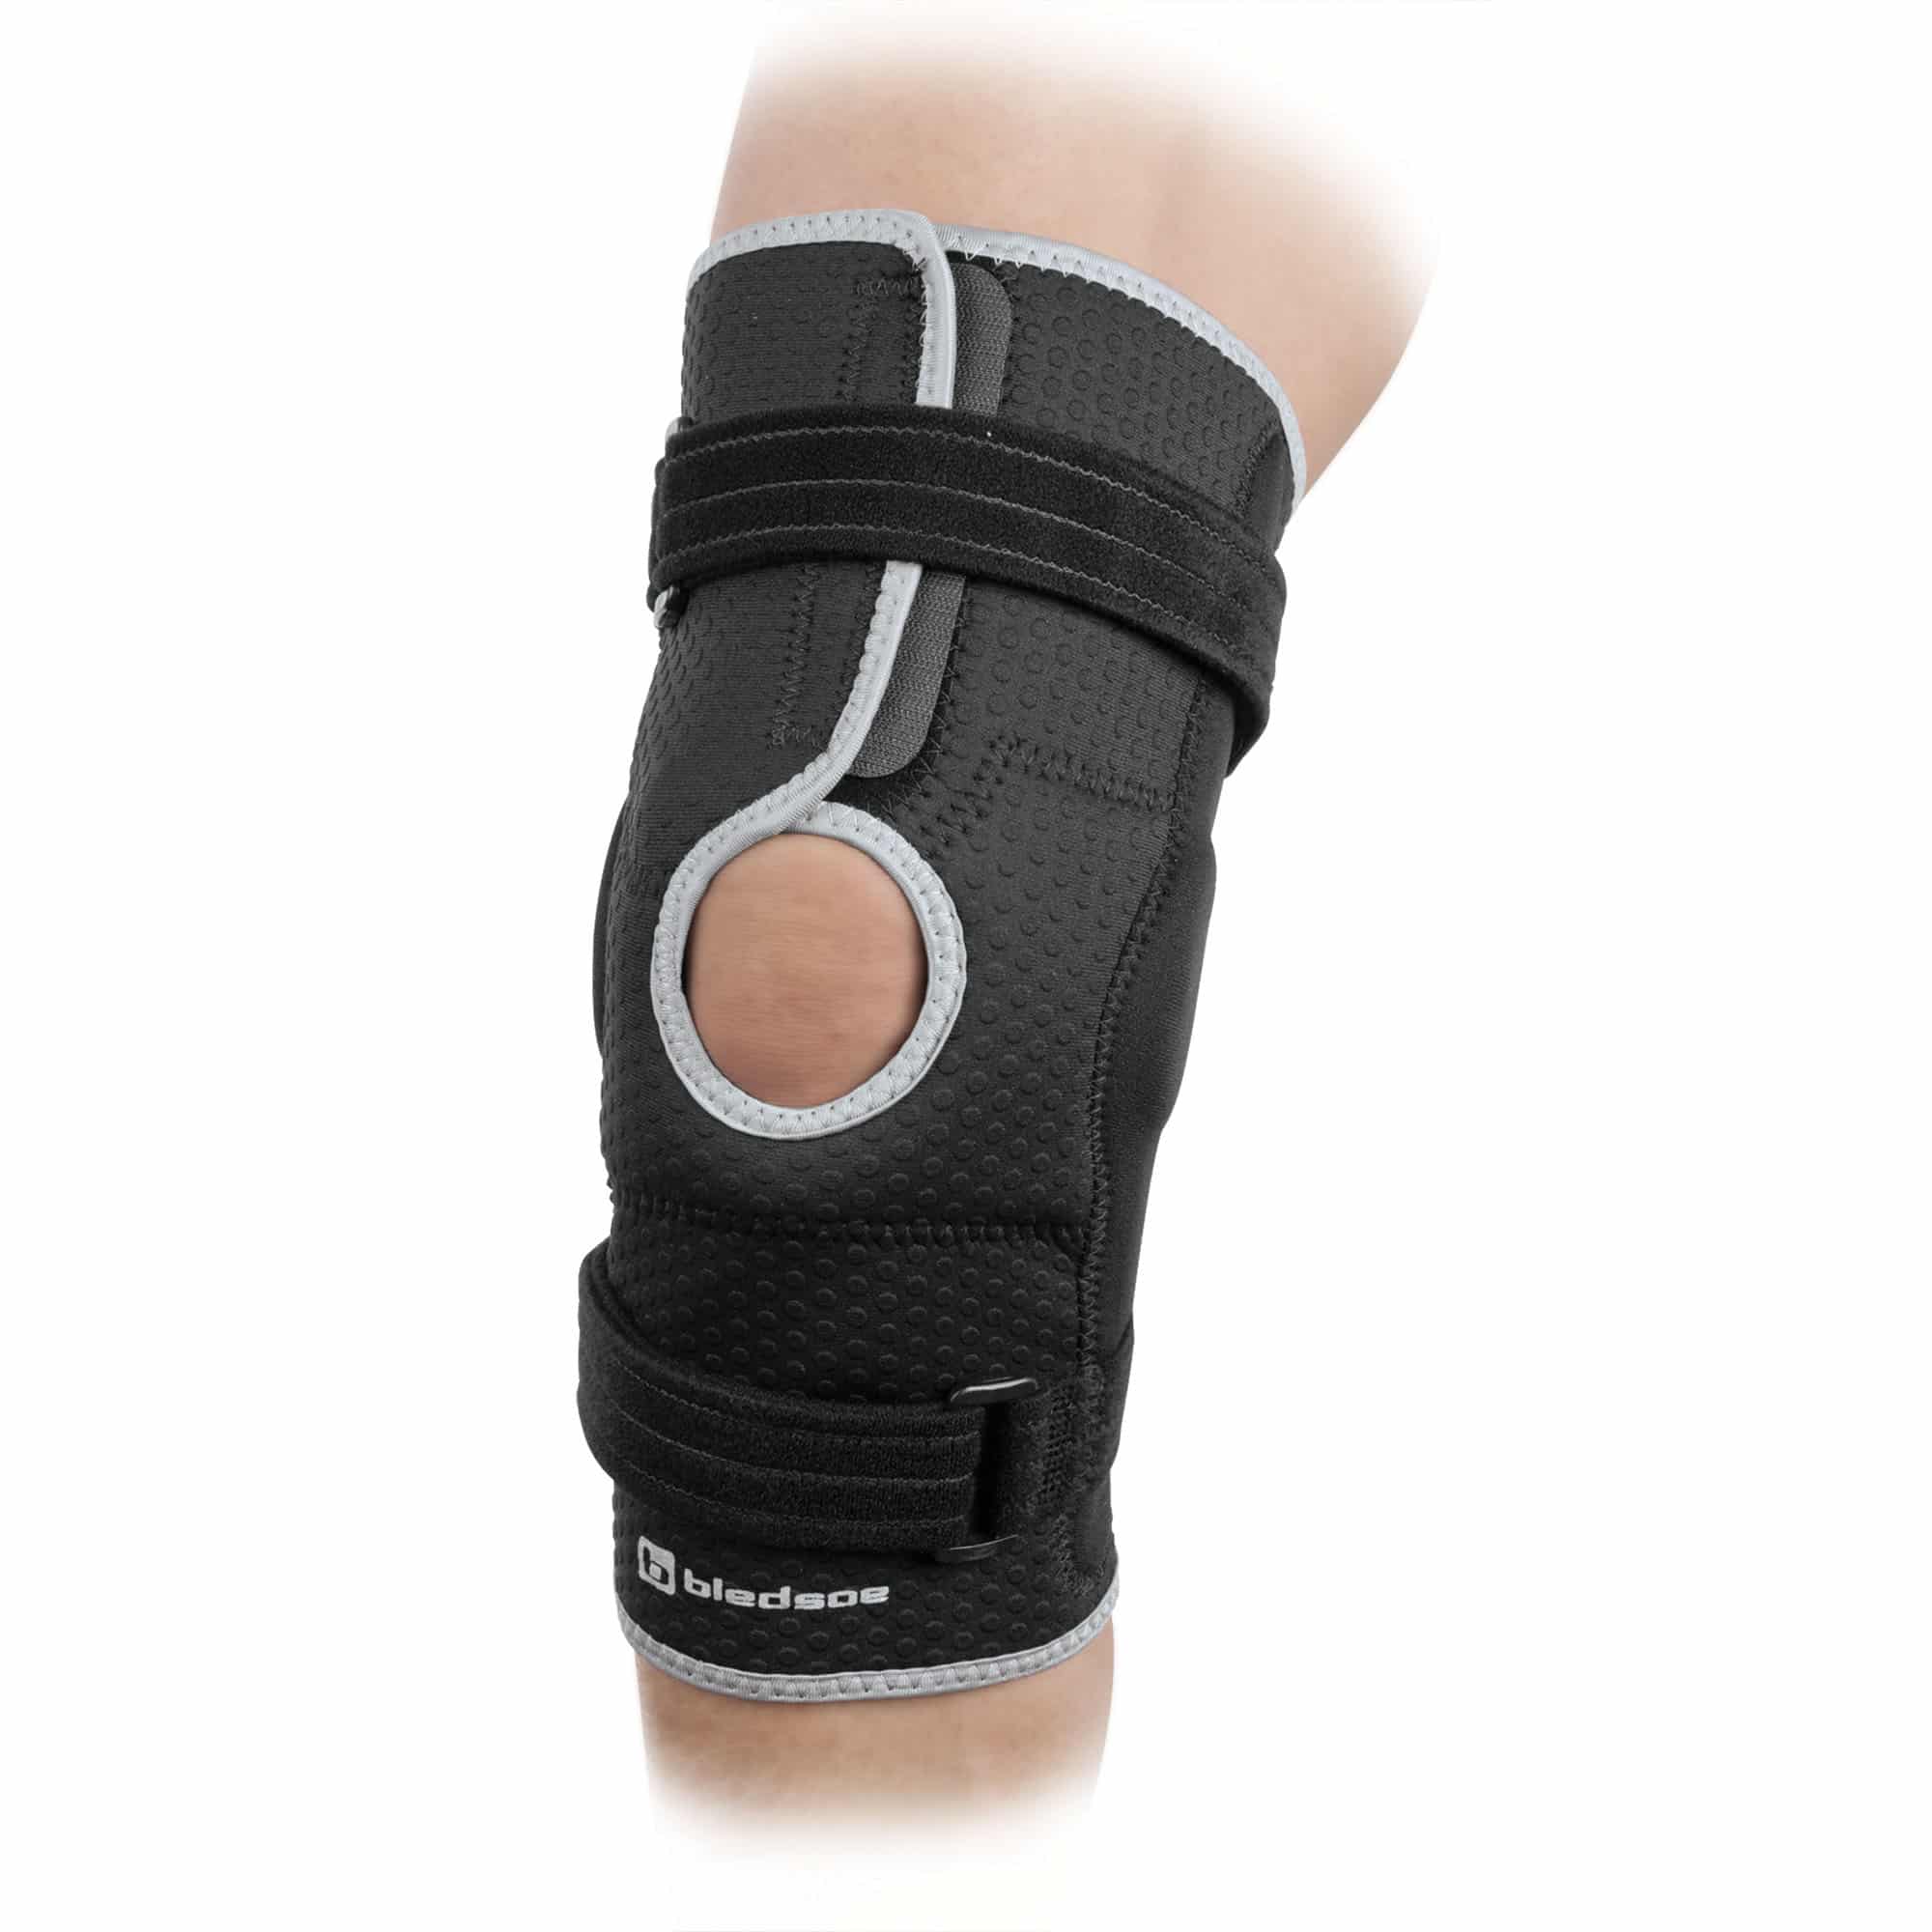 Buy Breg Buttress Support Soft Knee Brace at Ubuy India